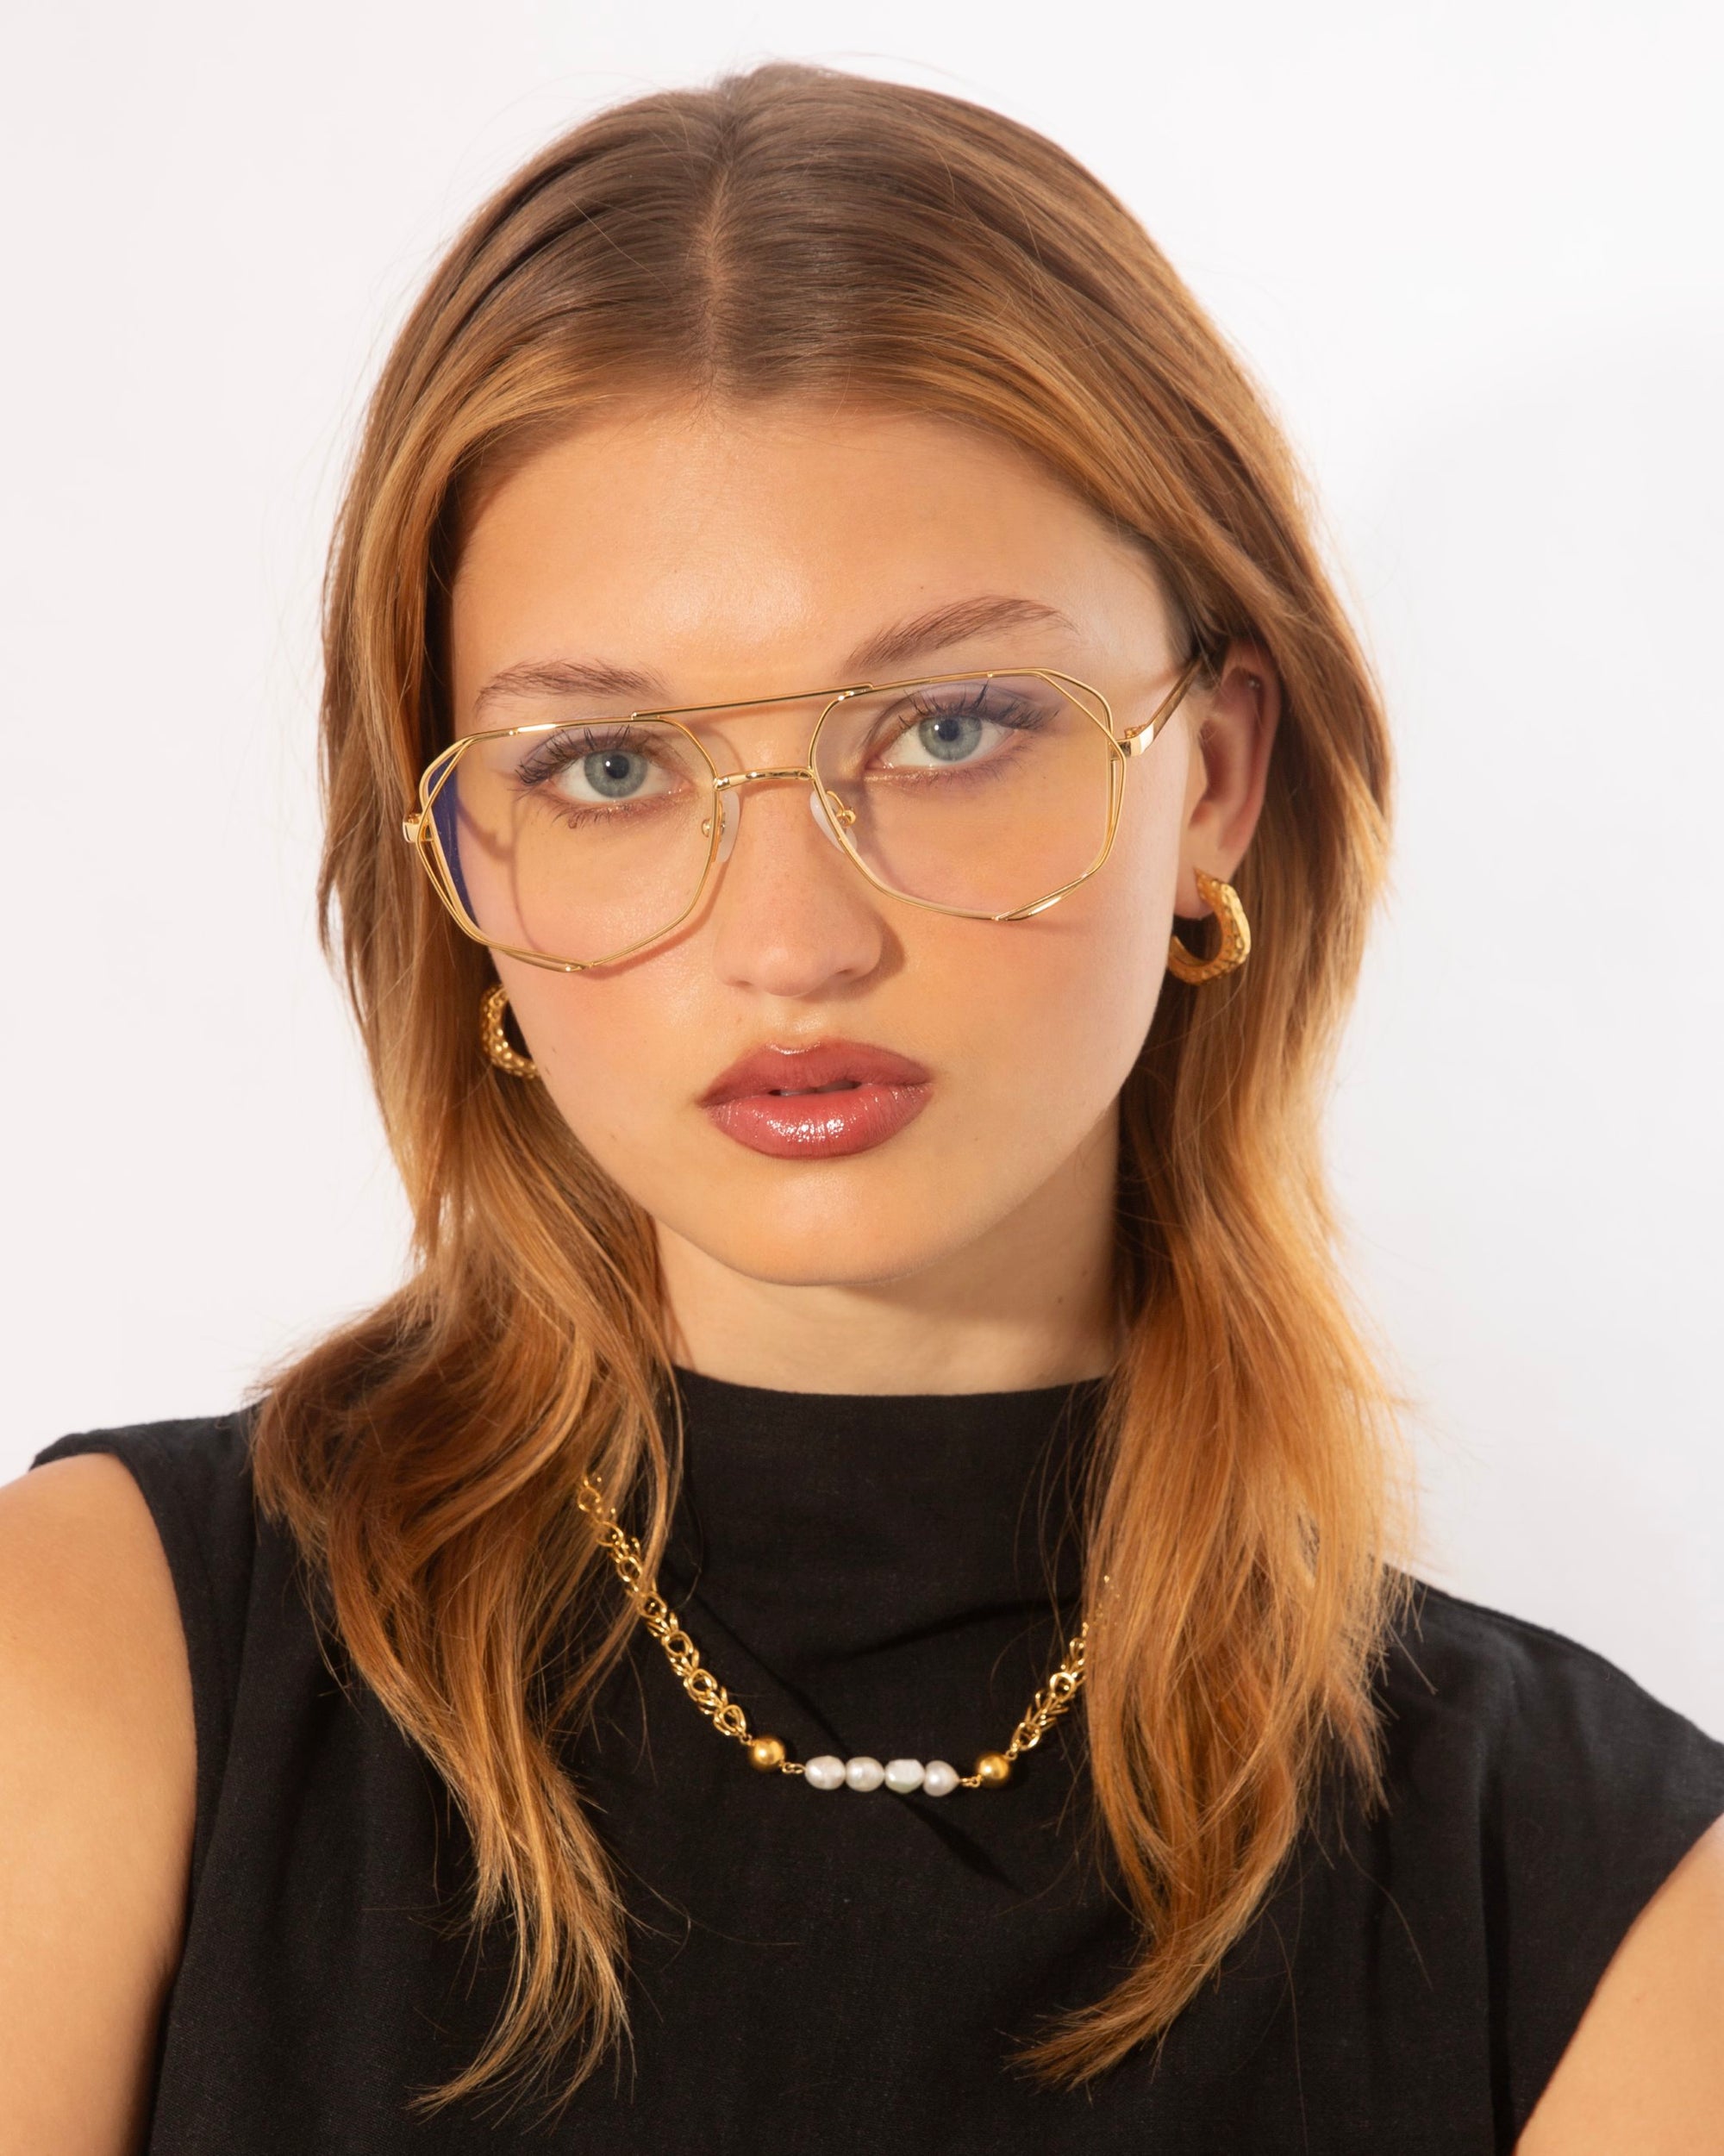 A young woman with straight reddish-brown hair and wearing For Art's Sake® Genius Two glasses, looks at the camera. She is dressed in a black sleeveless top and accessorized with gold hoop earrings and a gold necklace with white beads. The background is plain white.